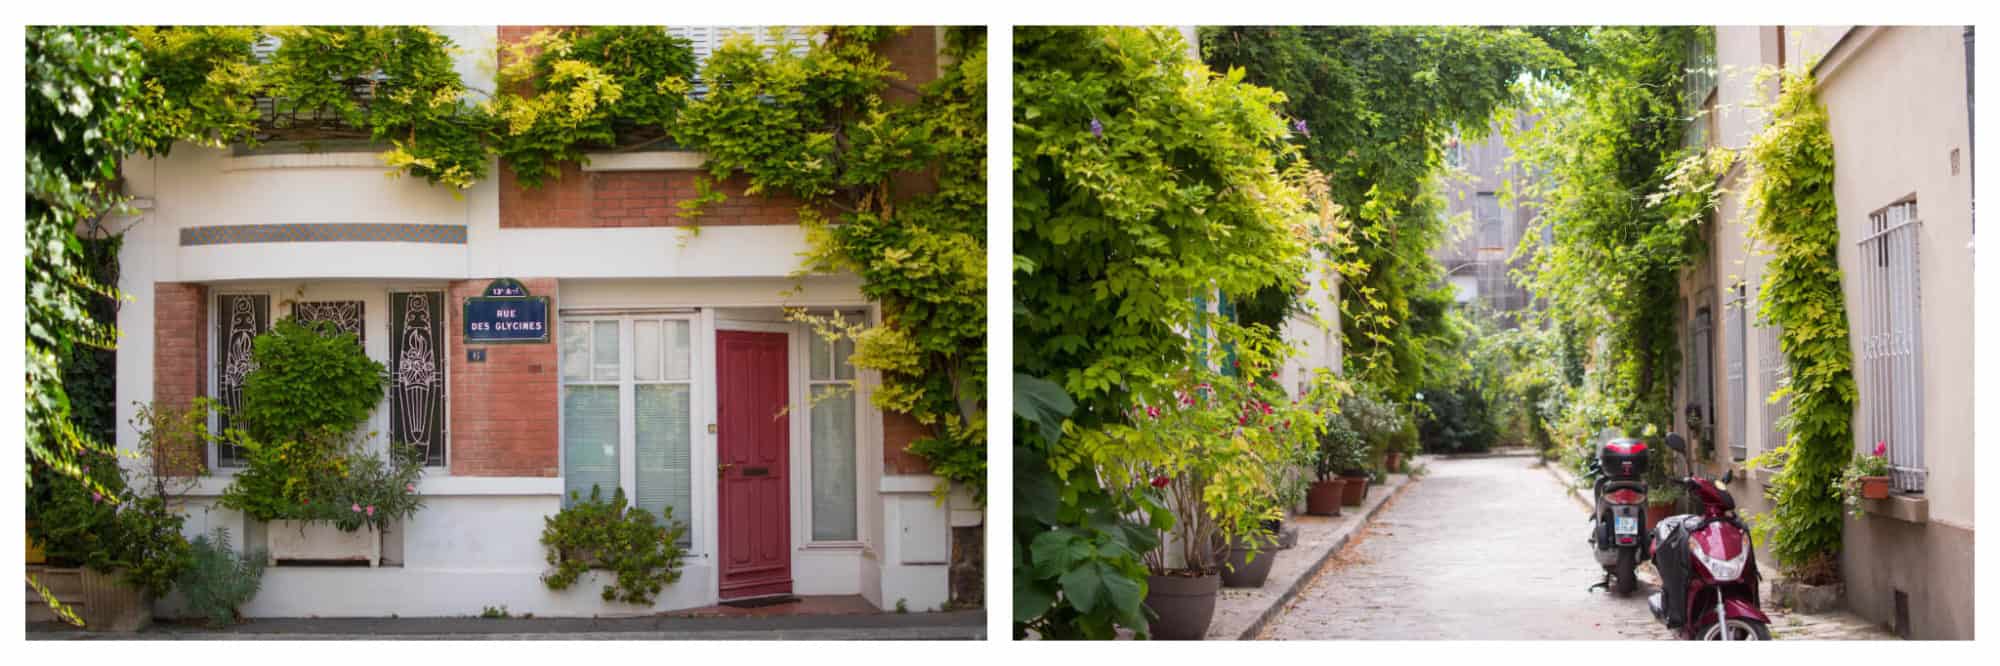 On left: In the Quartier de la Mouzaïa, located in Paris' 19th arrondissement, a quaint red door sits nestled in under lush vines on a sunny summer day. On right: The rue des Thermopyles, in Paris' 14th arrondissement, is quiet on a sunny day, light bouncing off of the abundant greenery. 